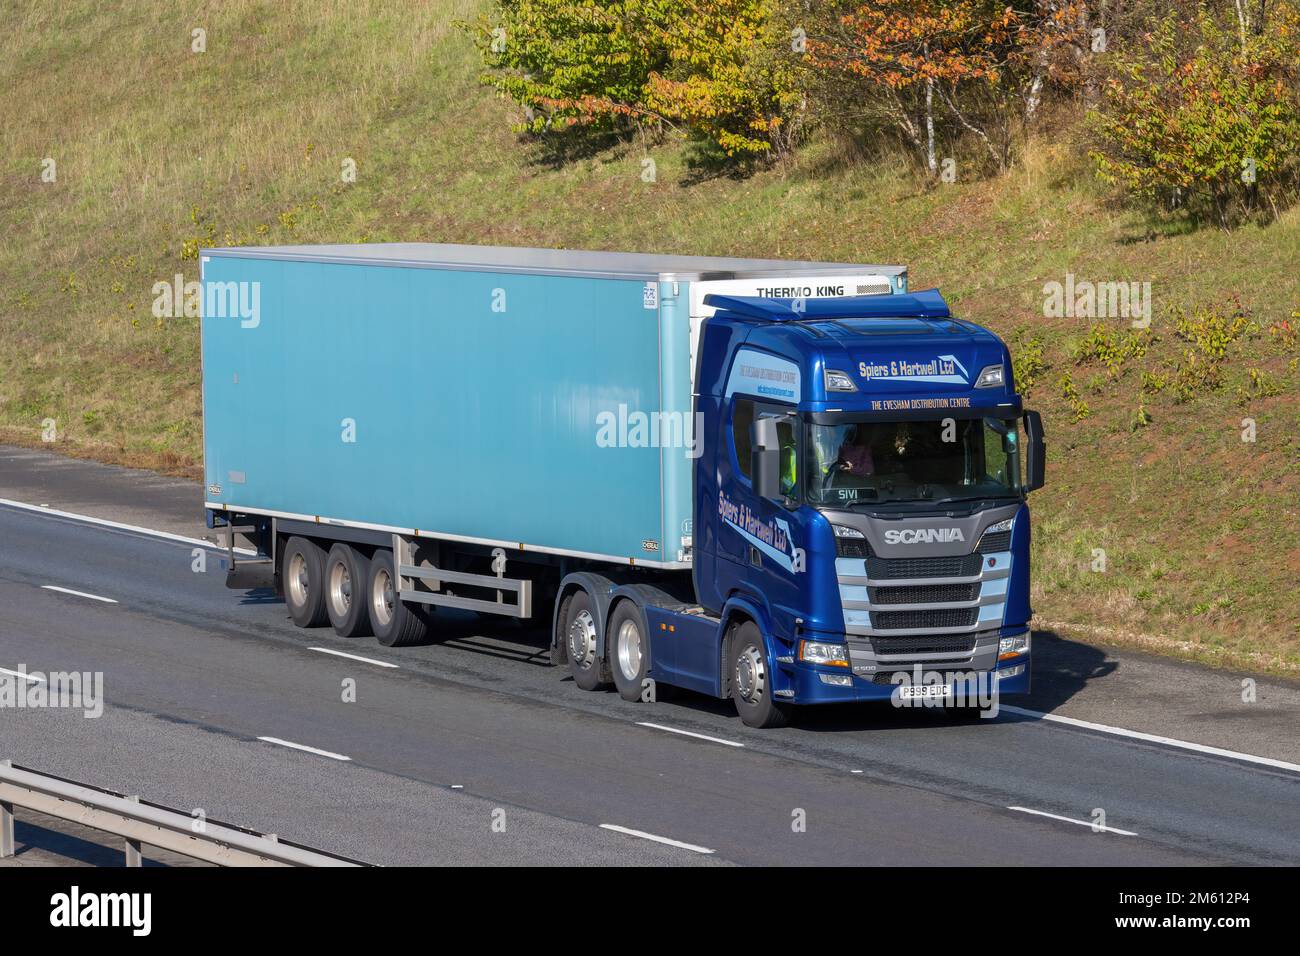 Spiers & Hartwell Scania S500 P999 EDC Stock Photo